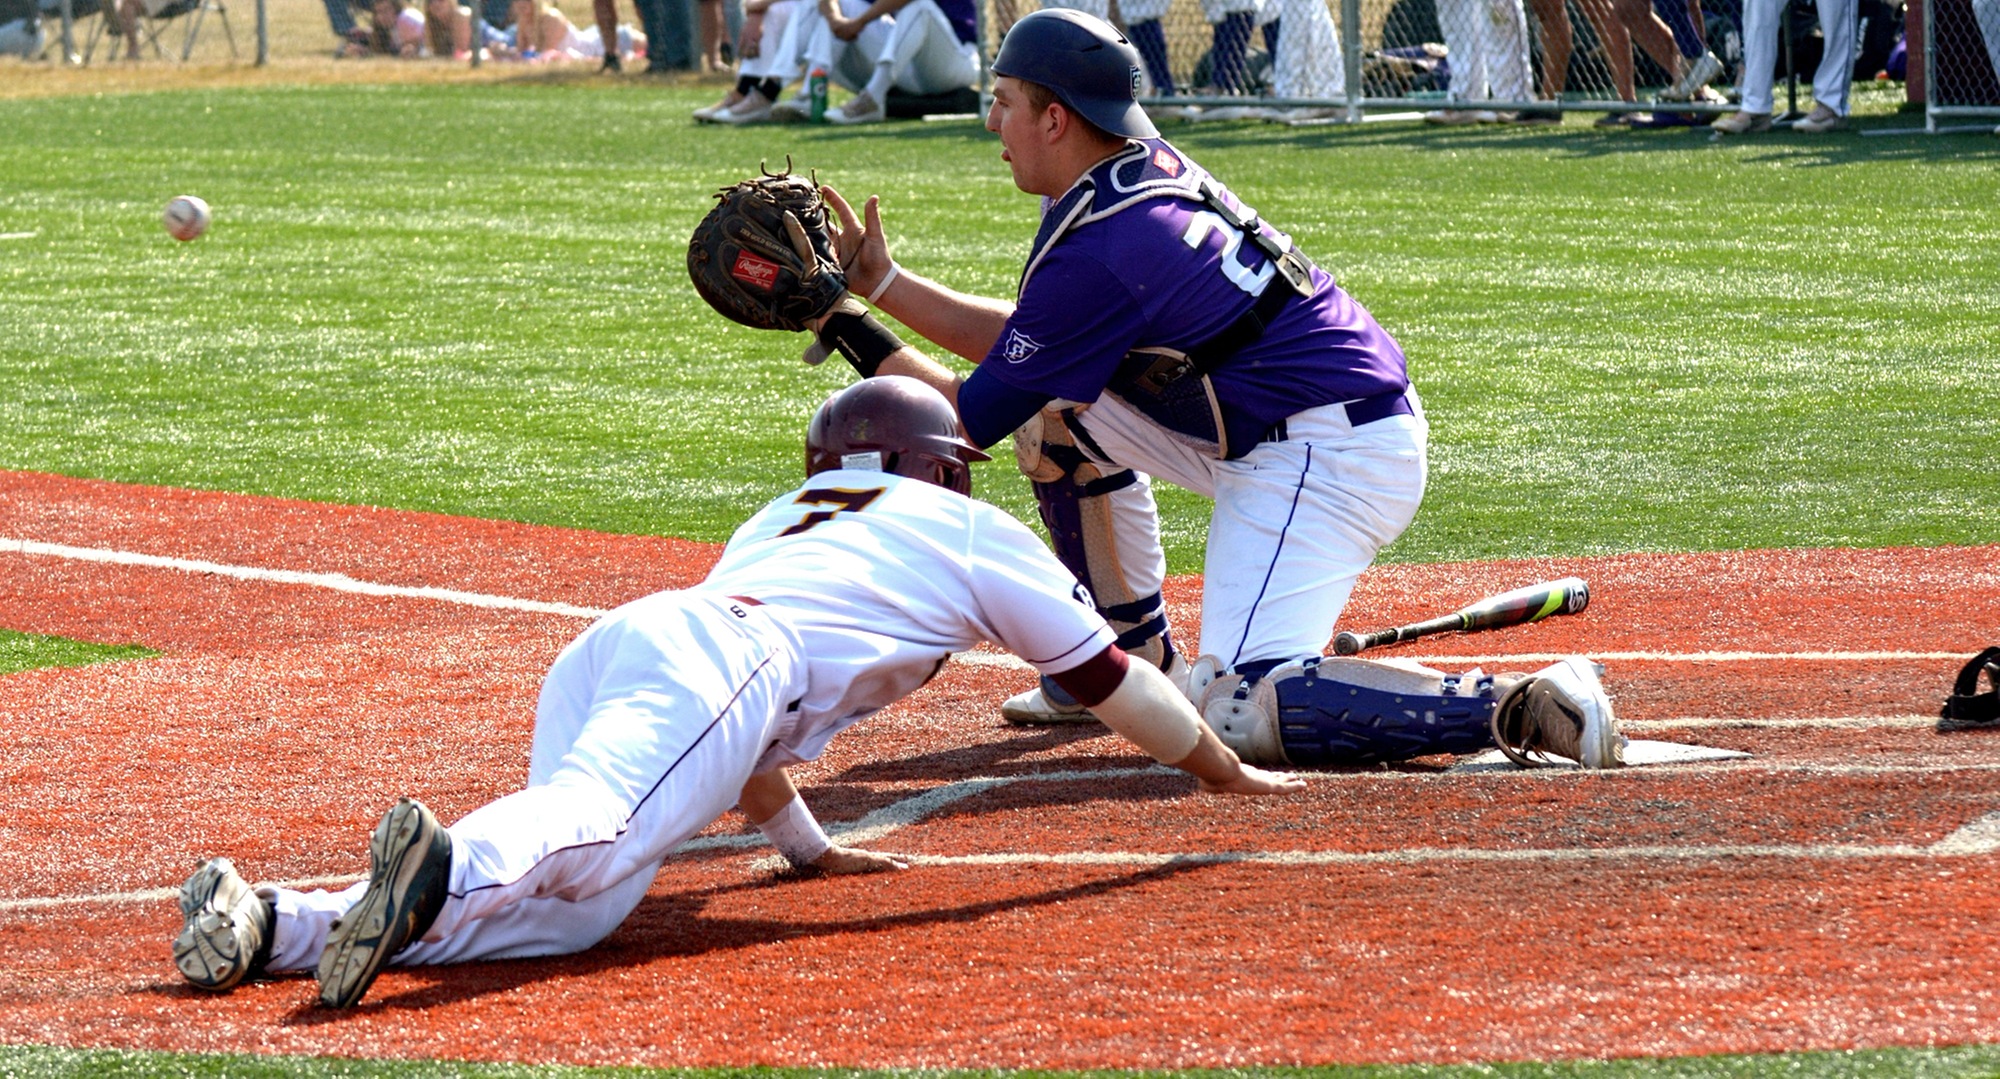 Sophomore Alec Sames slides safely into hom in the second game of the Cobbers' DH with St. Thomas. Hoeft was 3-for-3 in the game.